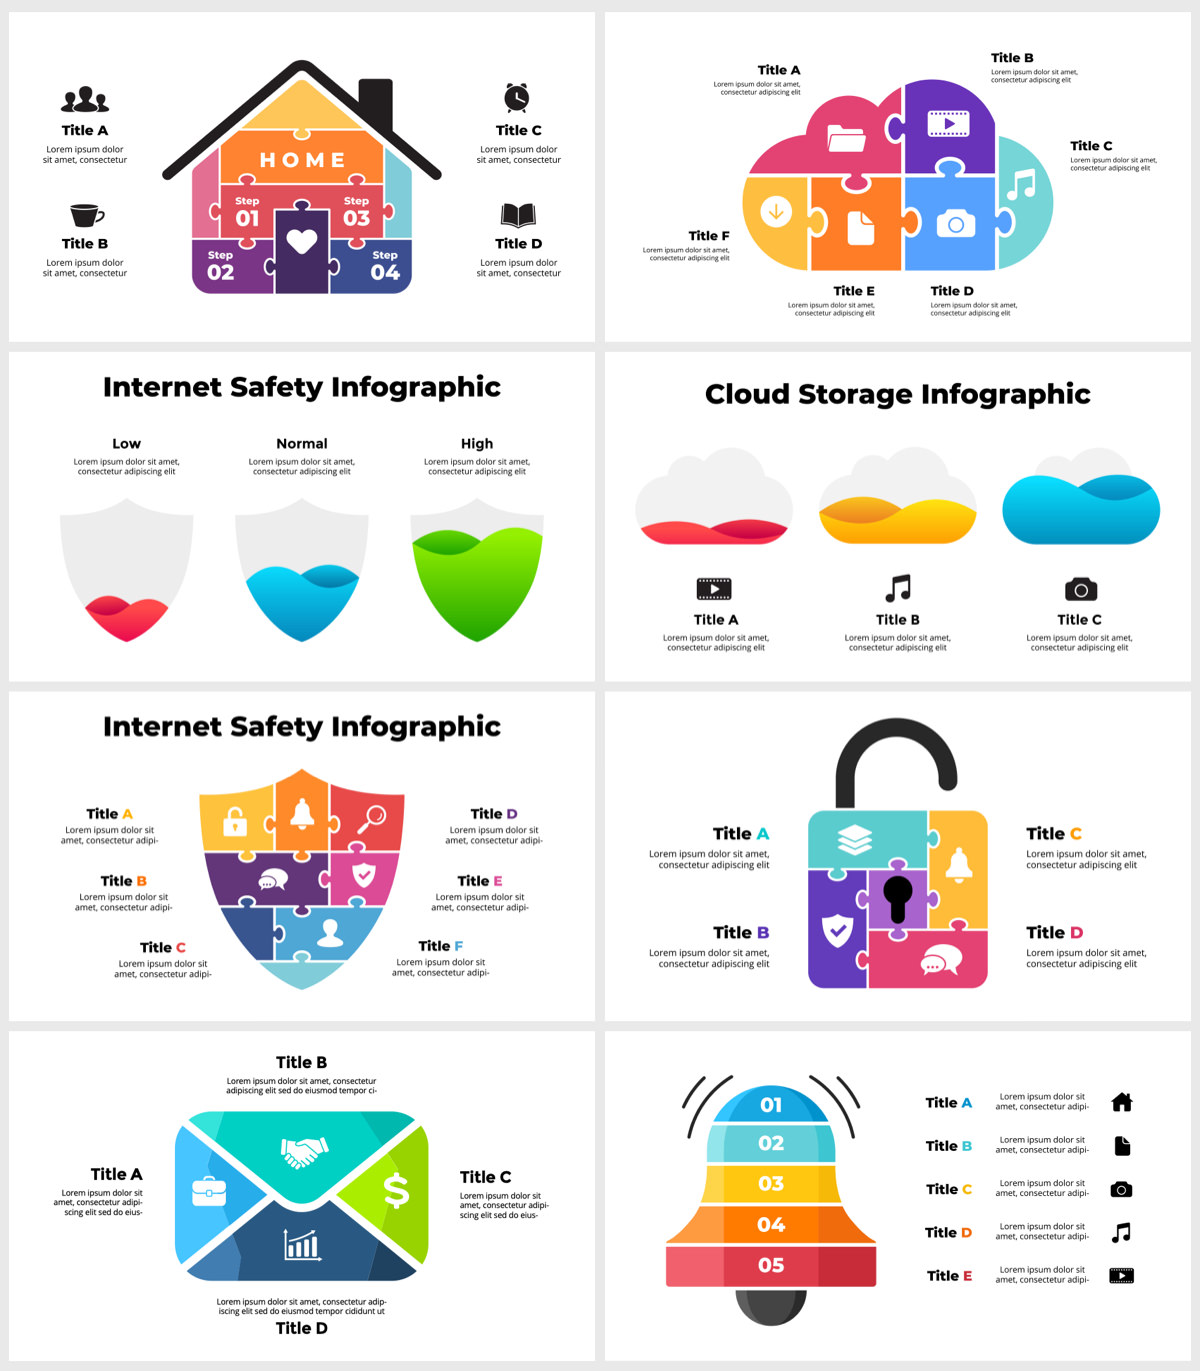 Wowly - 3500 Infographics & Presentation Templates! Updated! PowerPoint Canva Figma Sketch Ai Psd. - 215